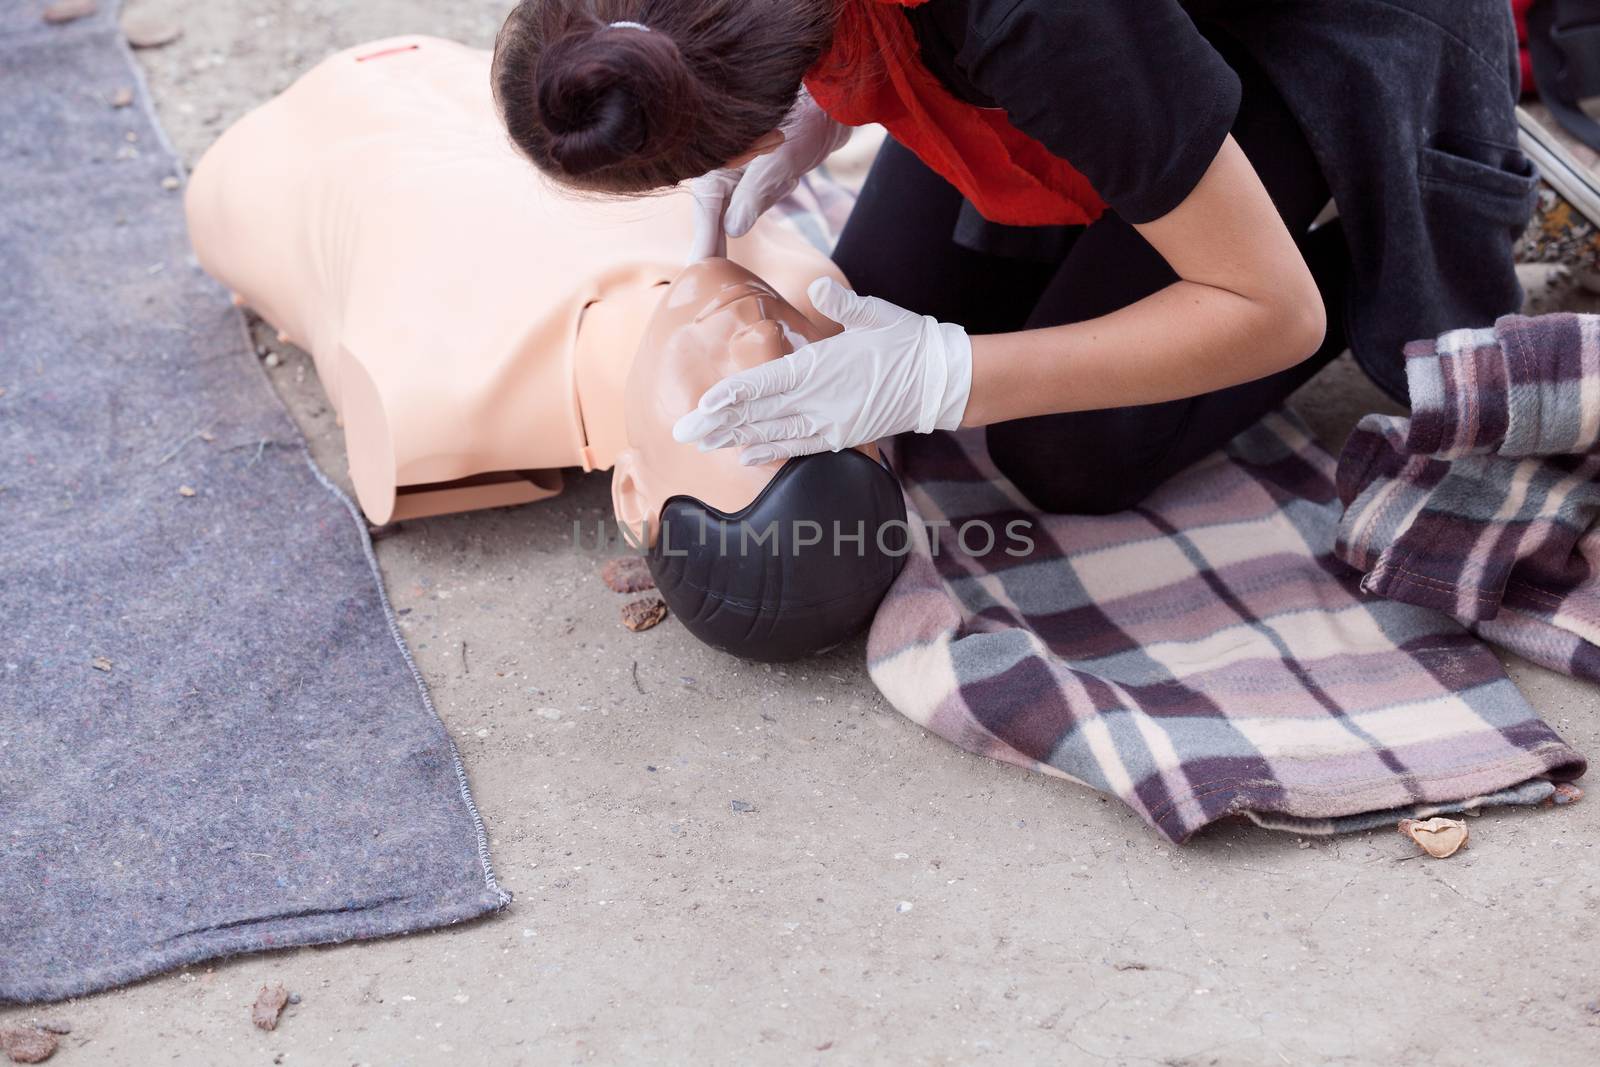 Checking heart rate. Female instructor showing cardiopulmonary resuscitation - CPR on training dummy. First aid training.